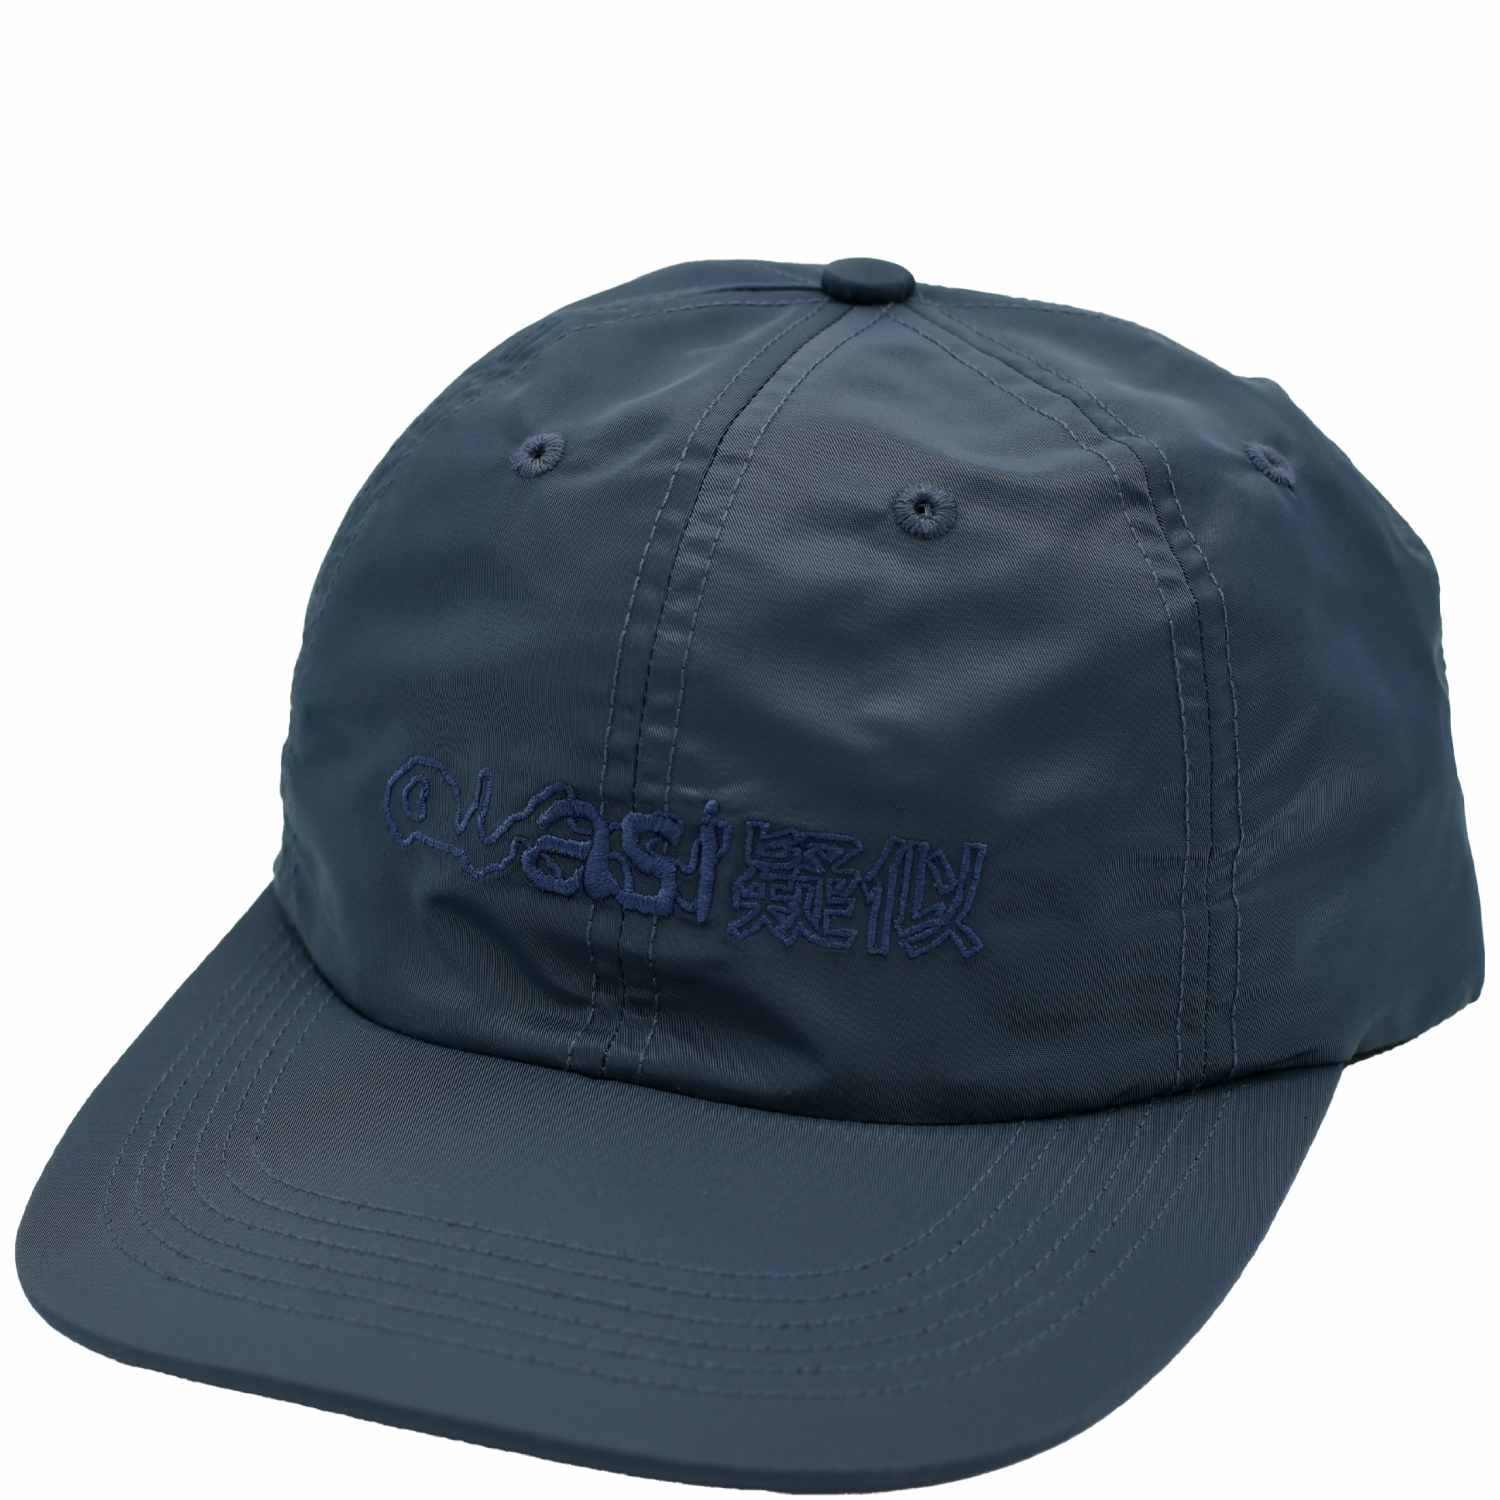 Quasi - Slang 6 Panel Hat - in Navy with embroidered Quasi logo on front.